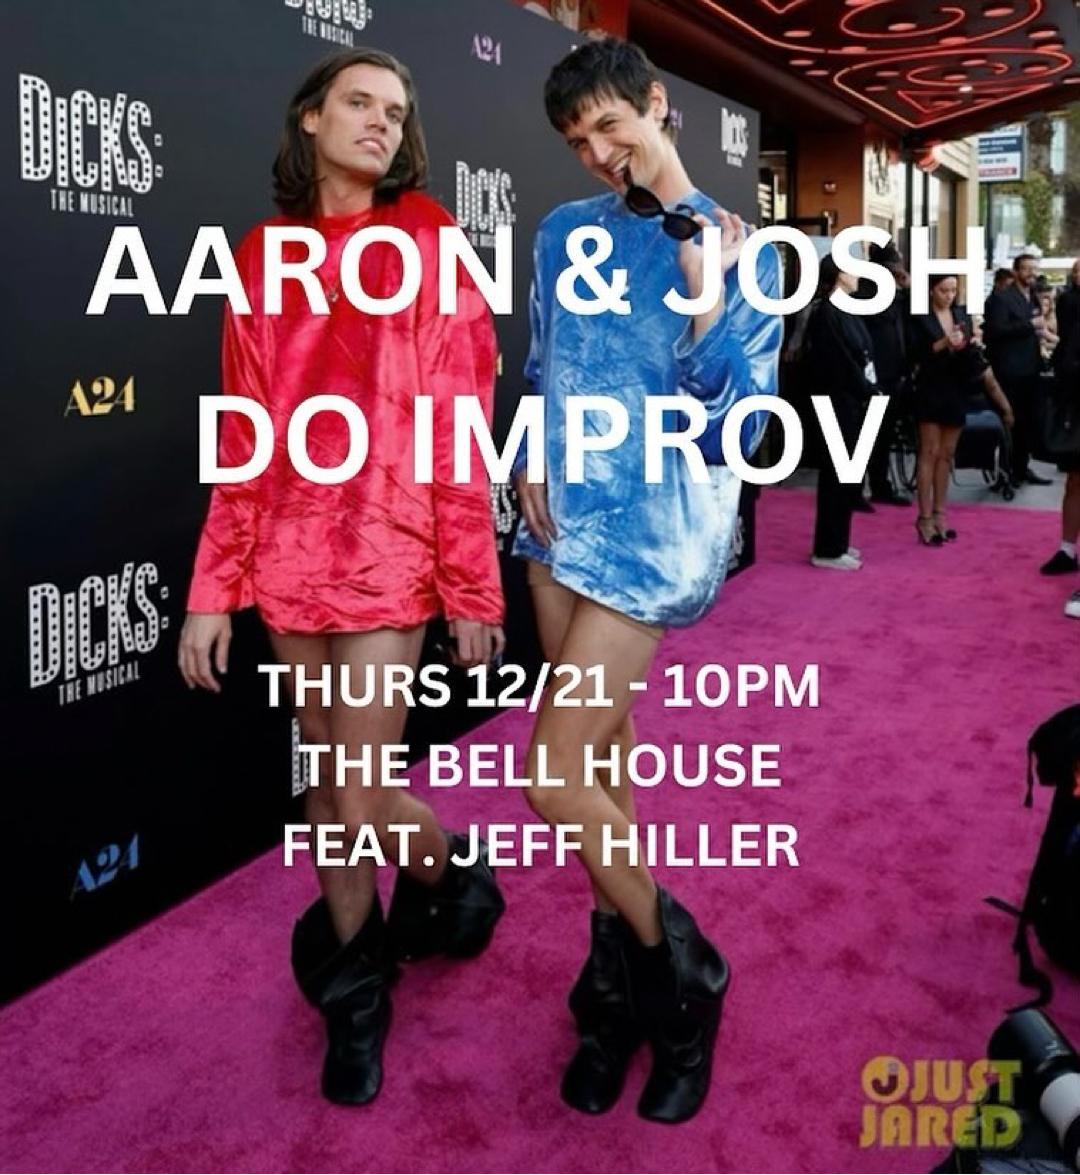 THU 12/21: Aaron & Josh Do Improv (Feat. Jeff Hiller) Aaron Jackson (Sandino) and Josh Sharp (Women & Men) shamefully return to their improv roots for a 45-minute set featuring Jeff Hiller (Police Chief Rumble)! Limited Tickets Left! 🎟️: tinyurl.com/2f965adu